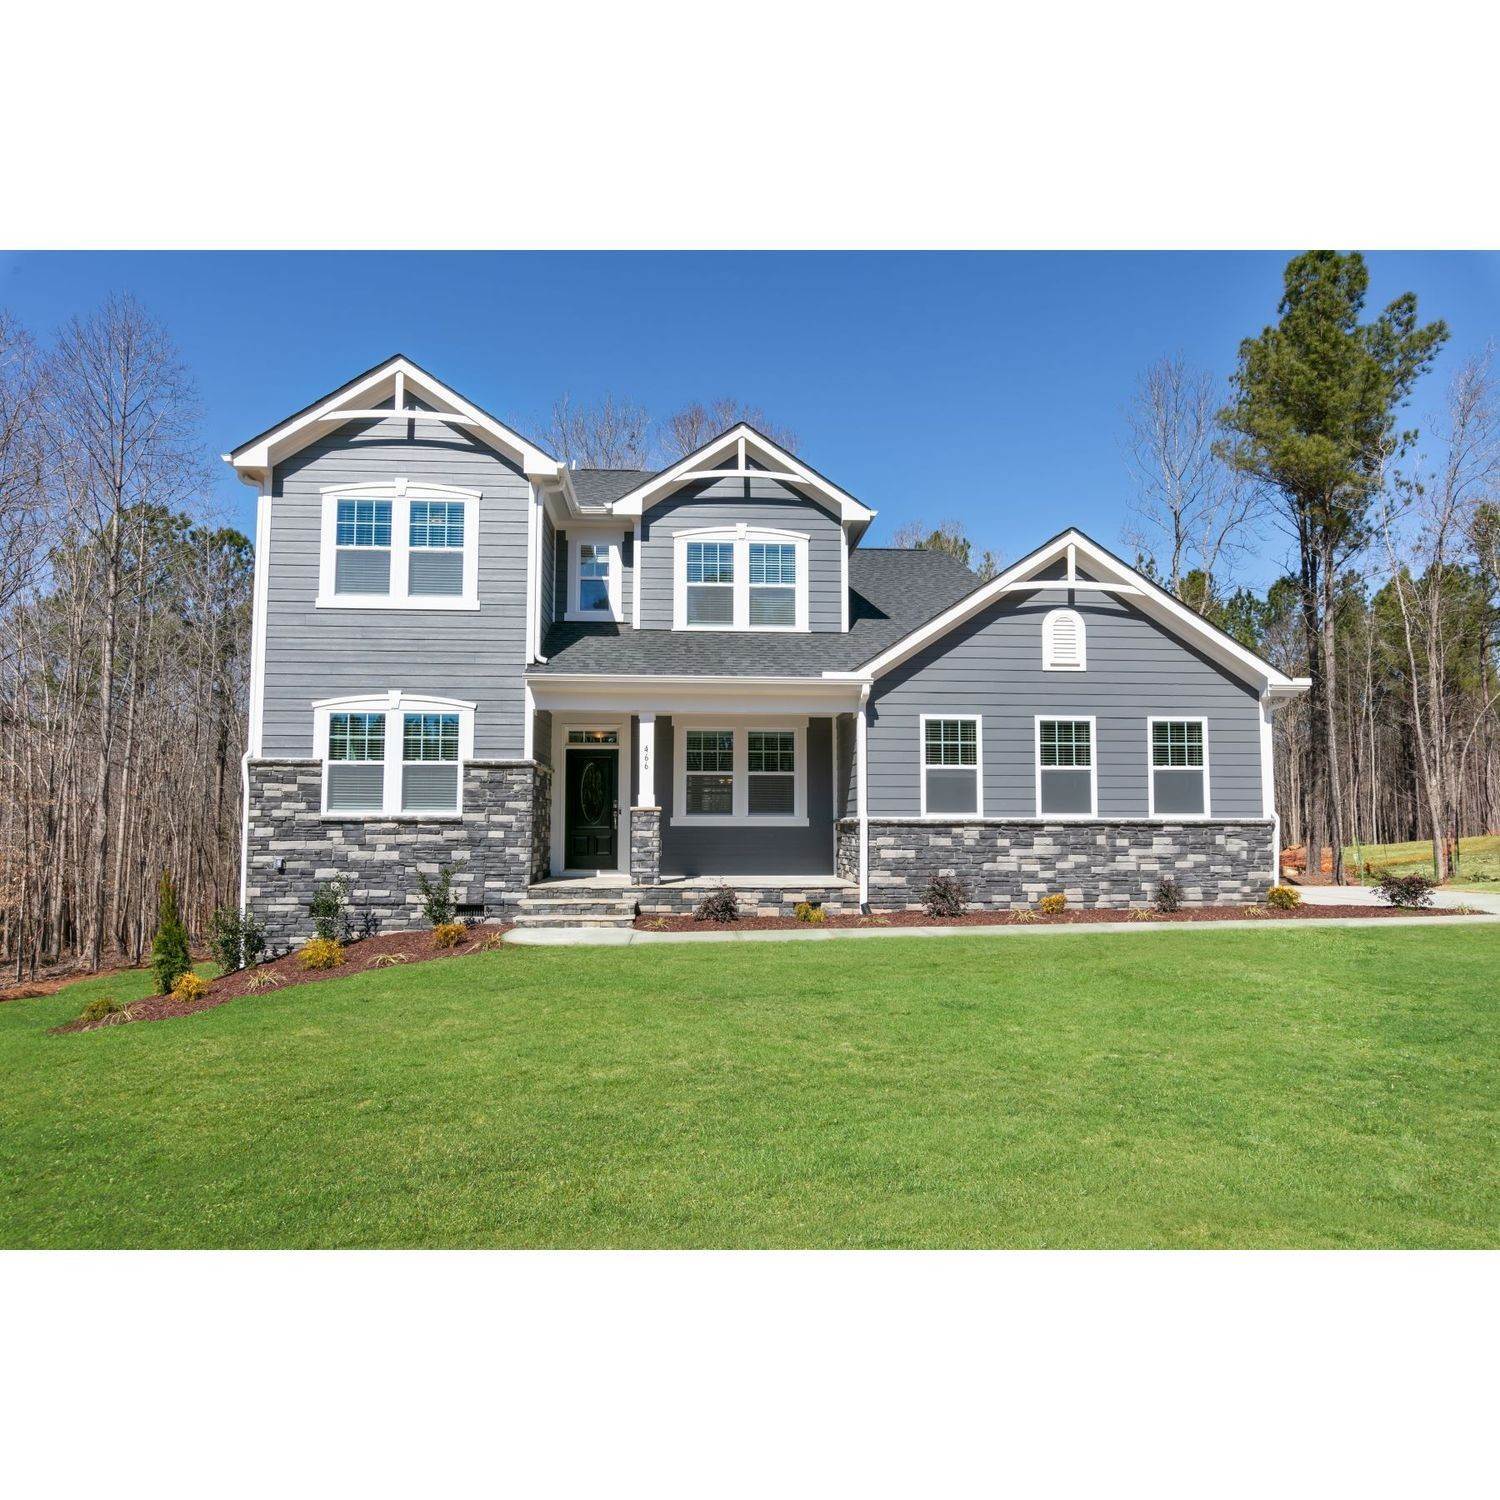 Single Family for Sale at Clayton, NC 27527